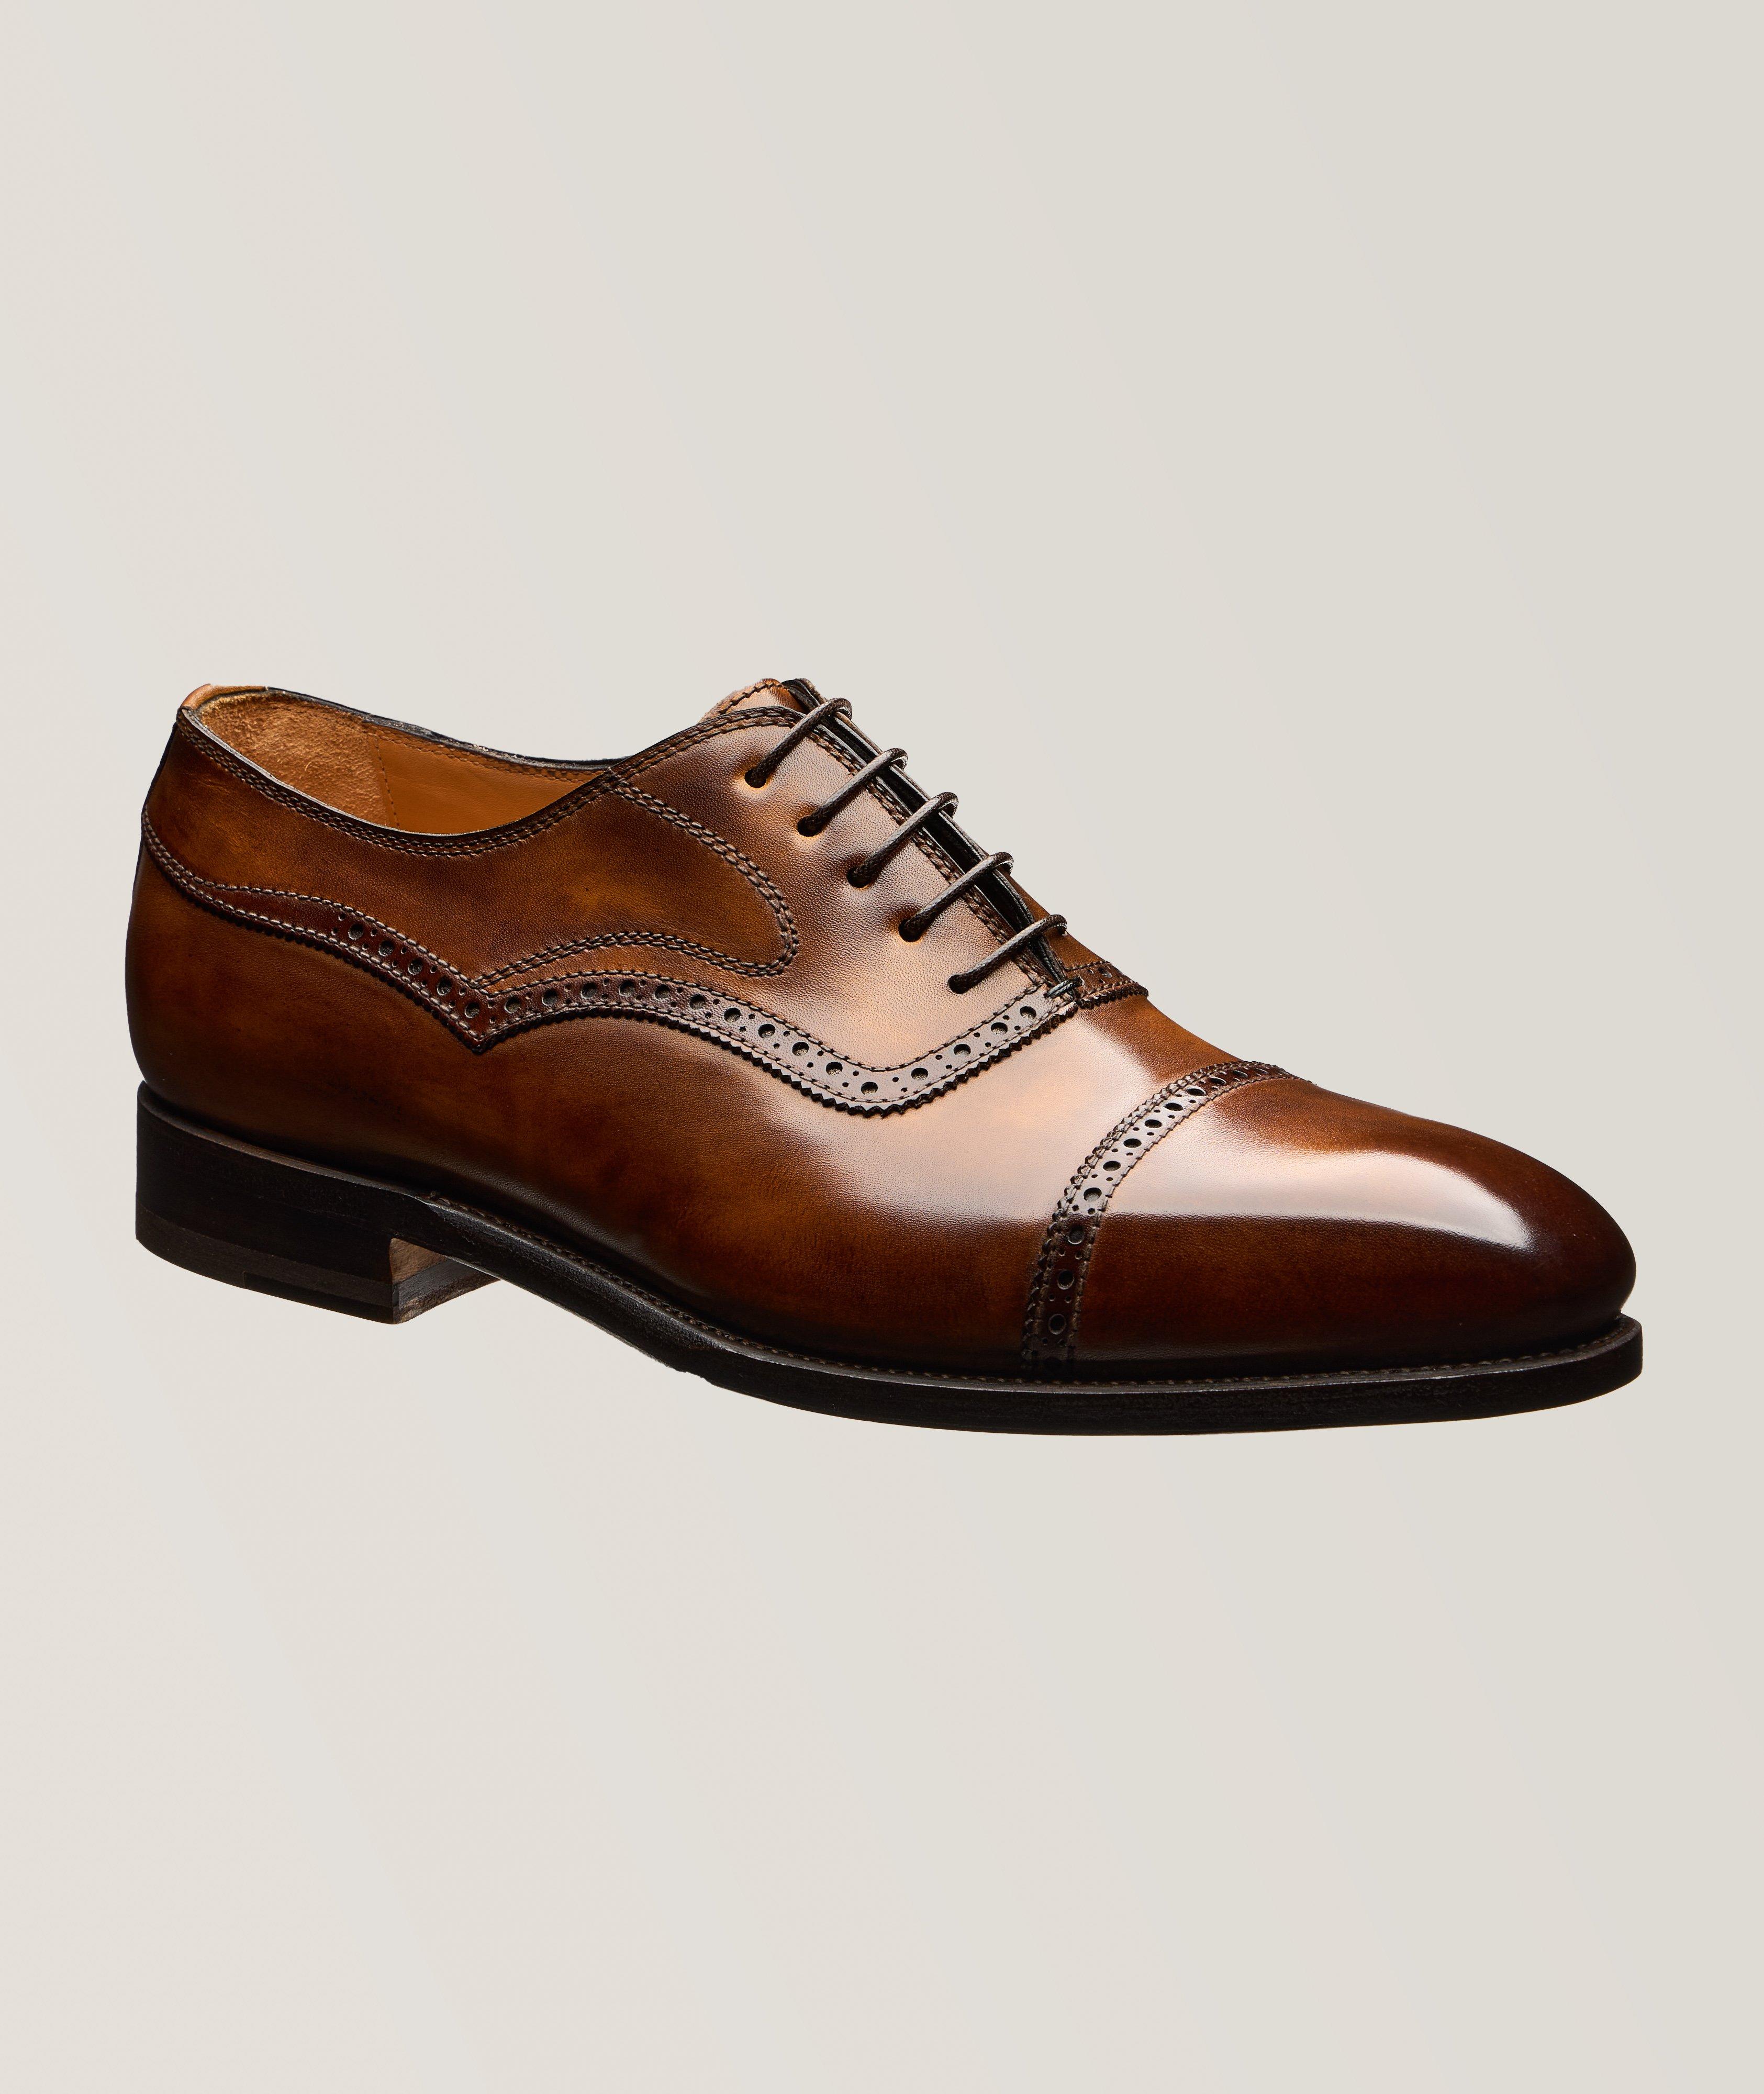 Luciano ll Leather Oxford Captoe  image 0